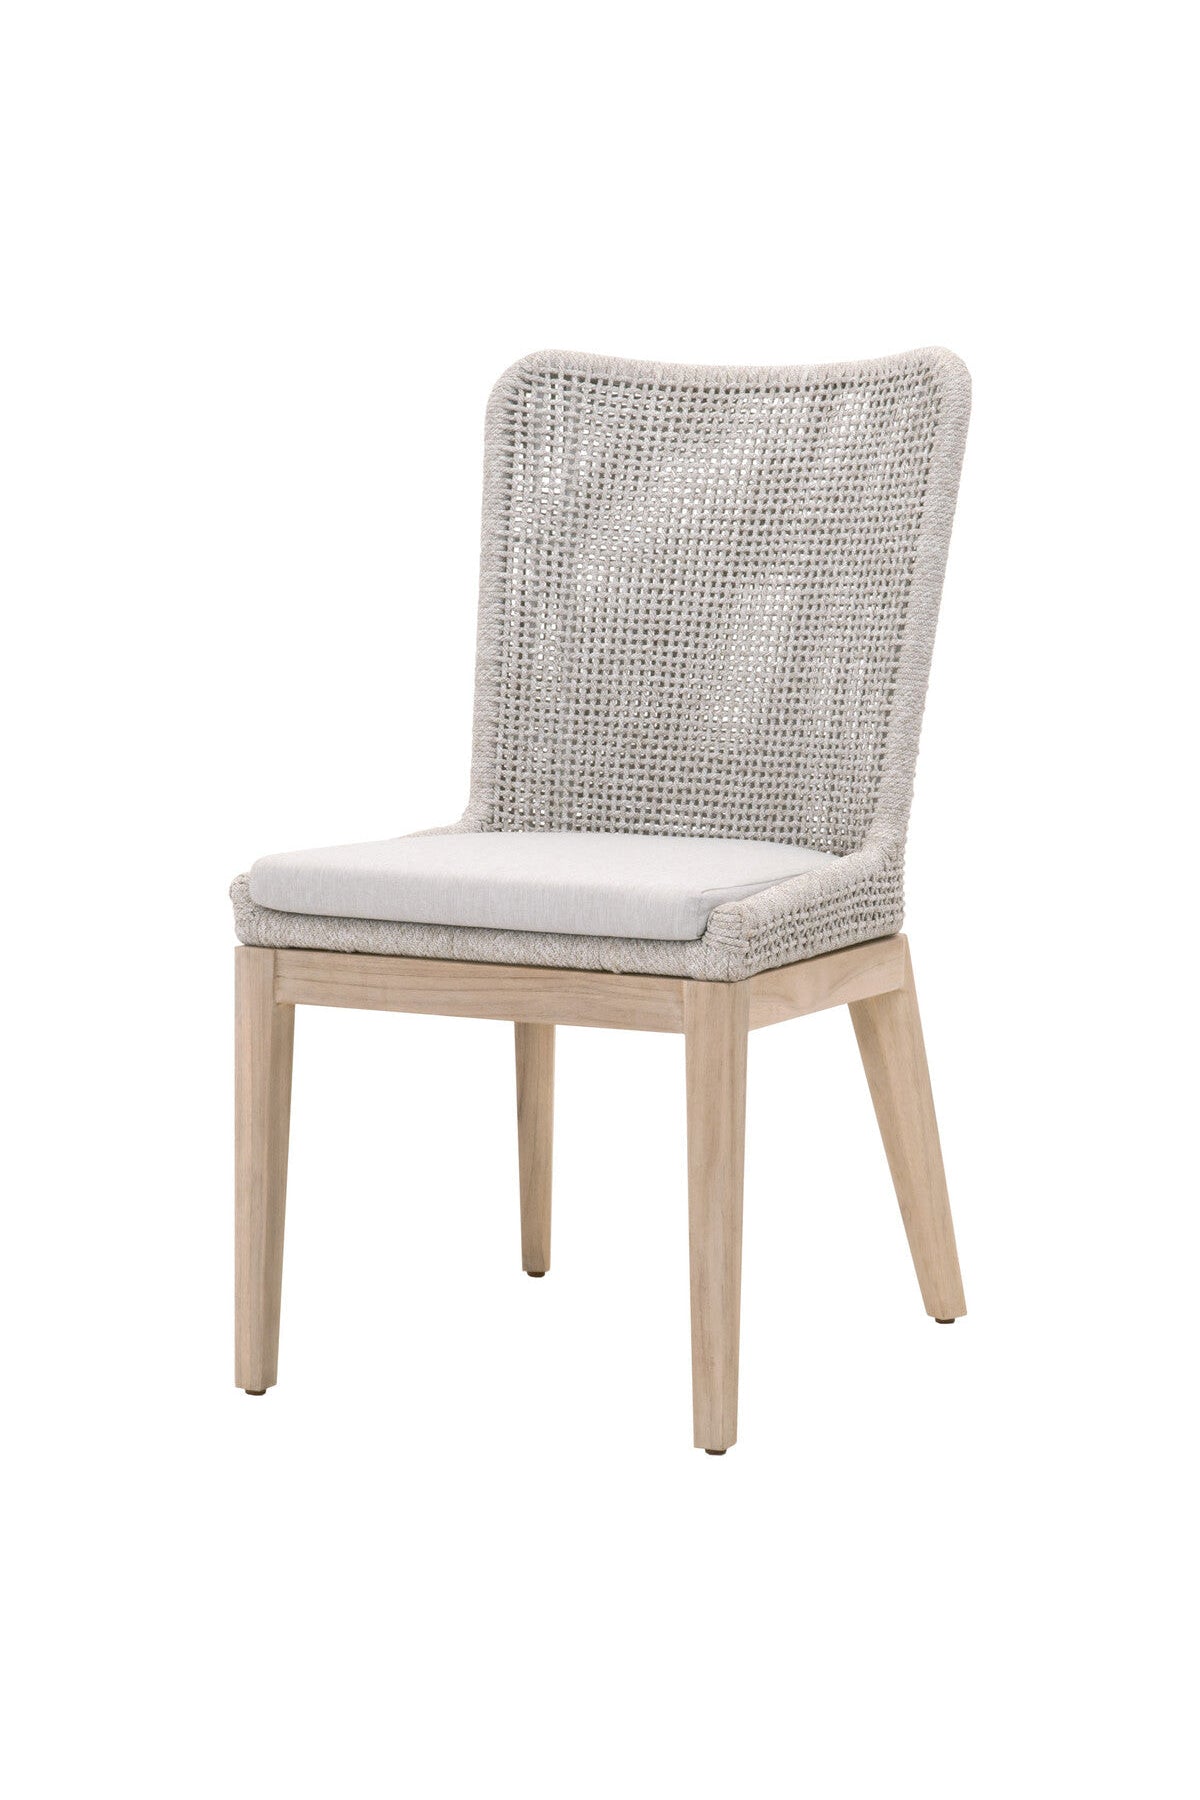 Campbell Outdoor Dining Chair - Set of 2